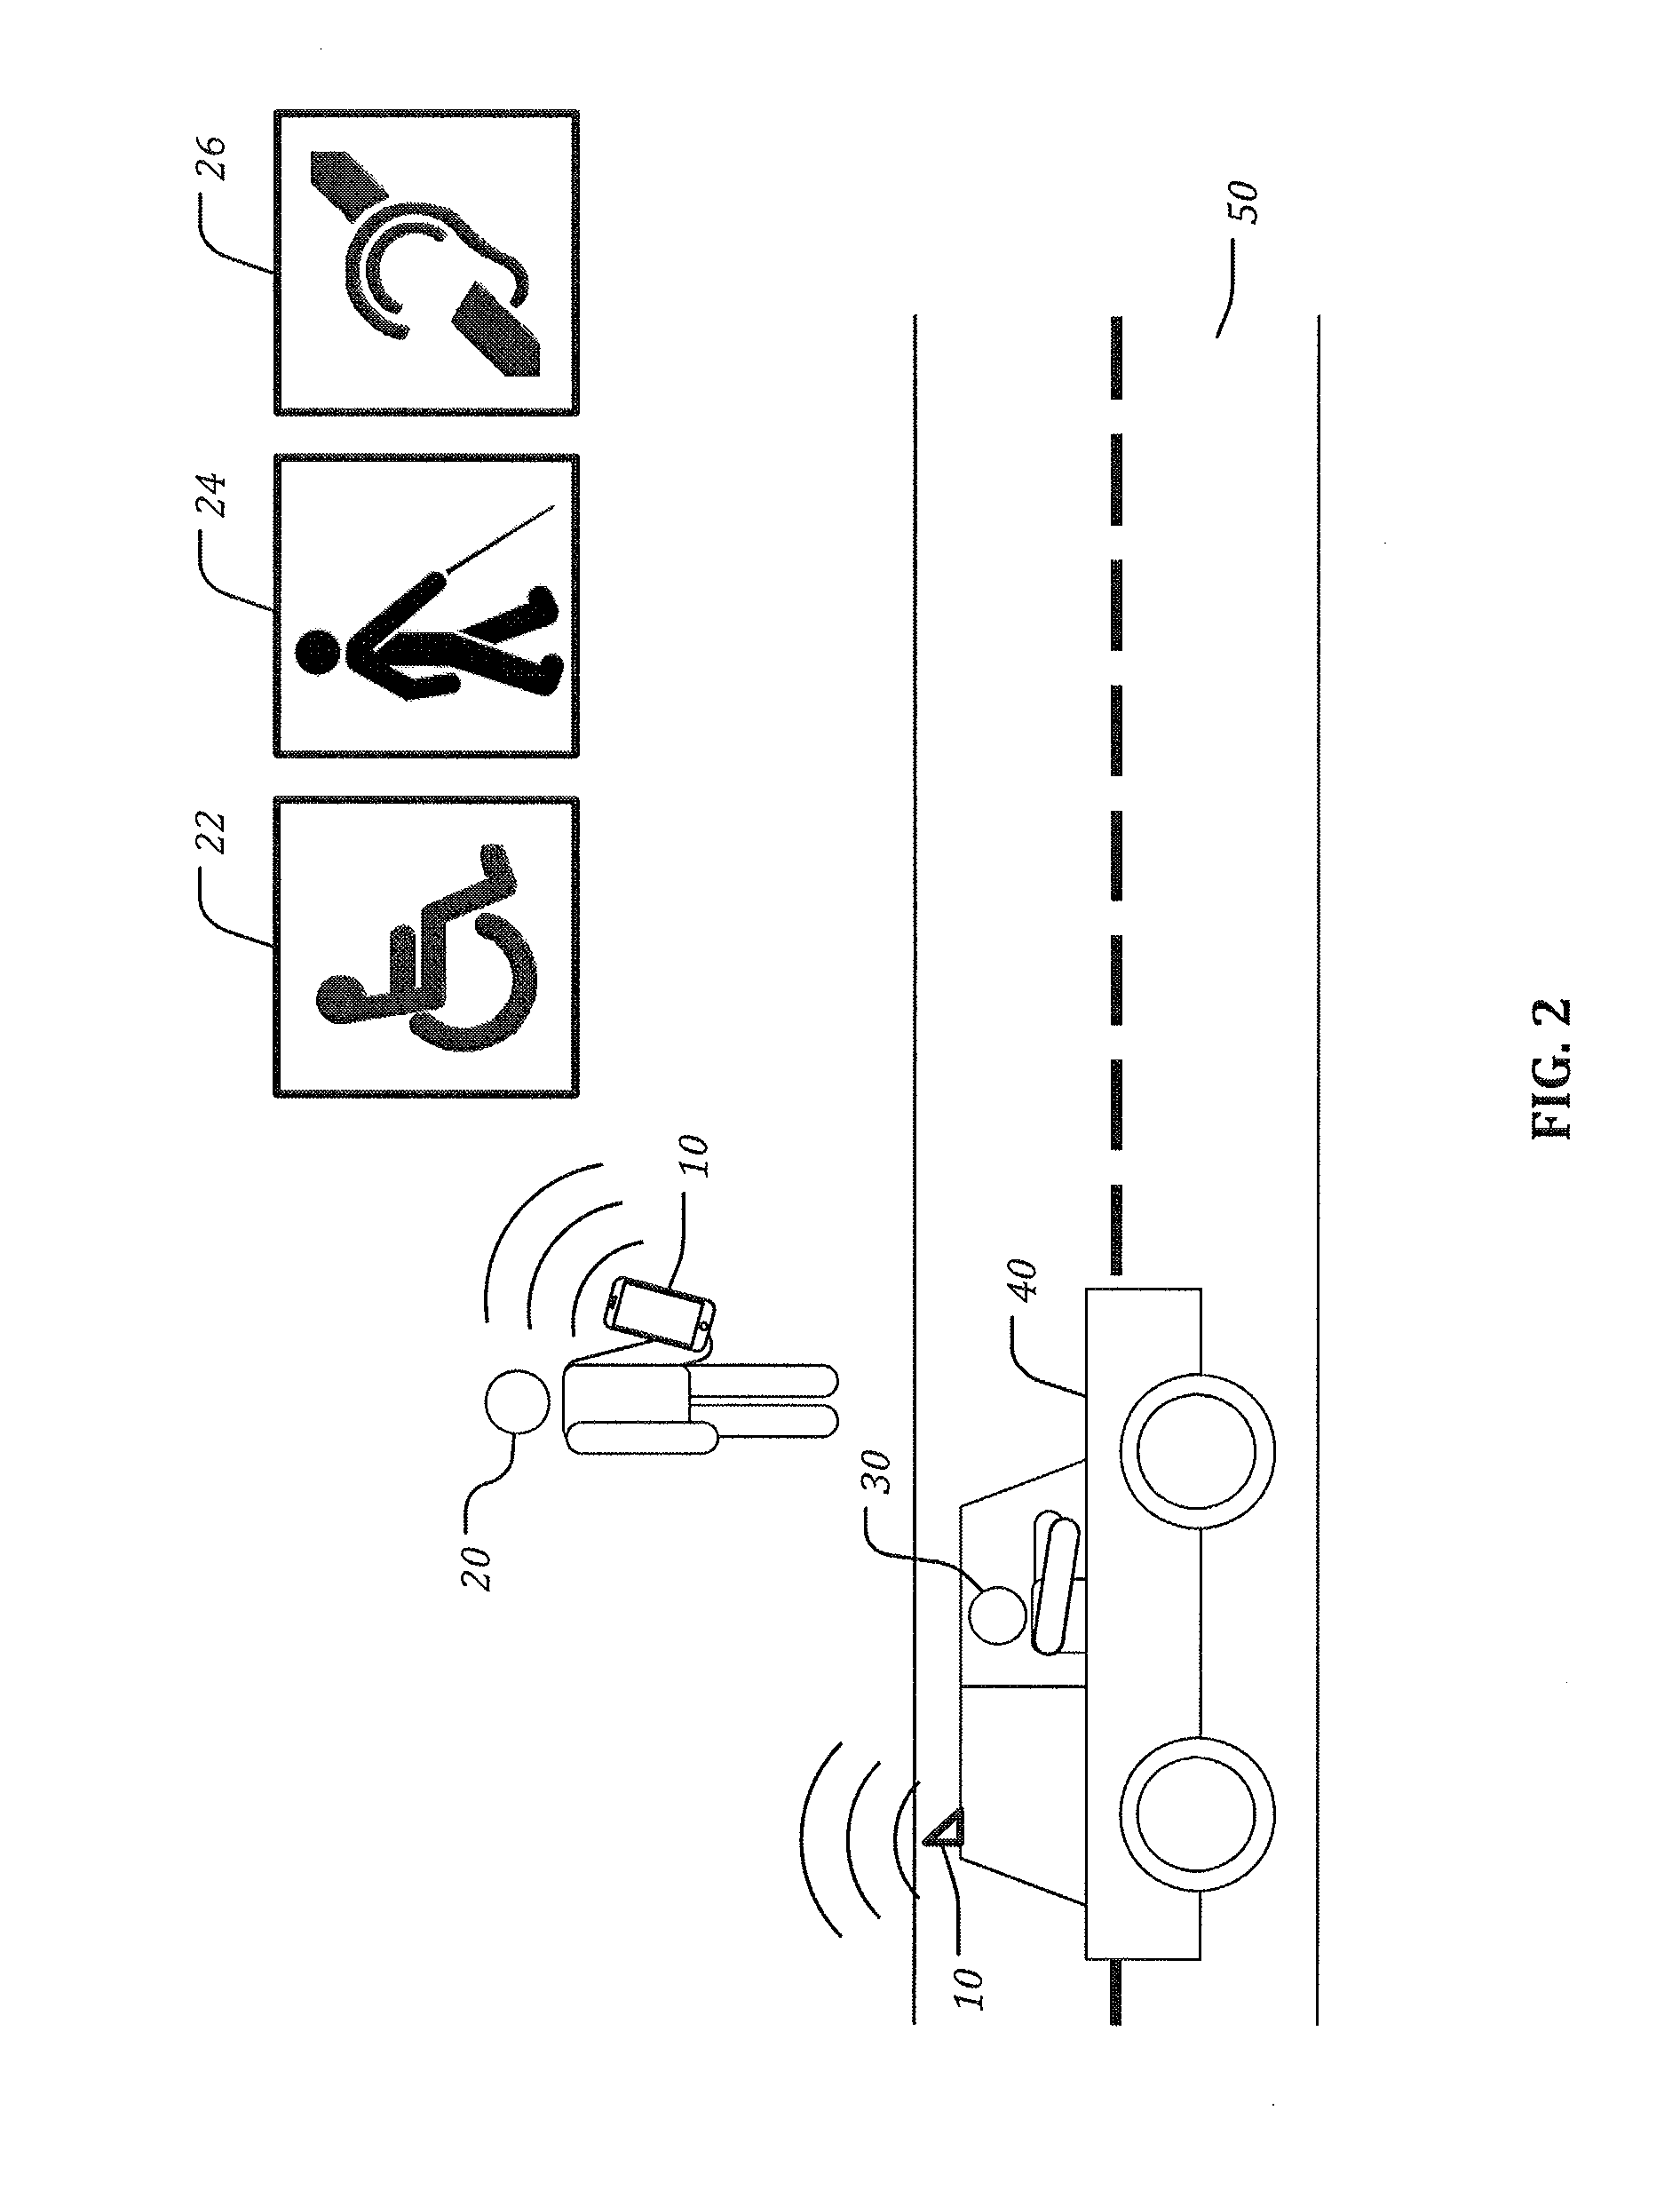 System and method for detection and utilization of driver distraction level